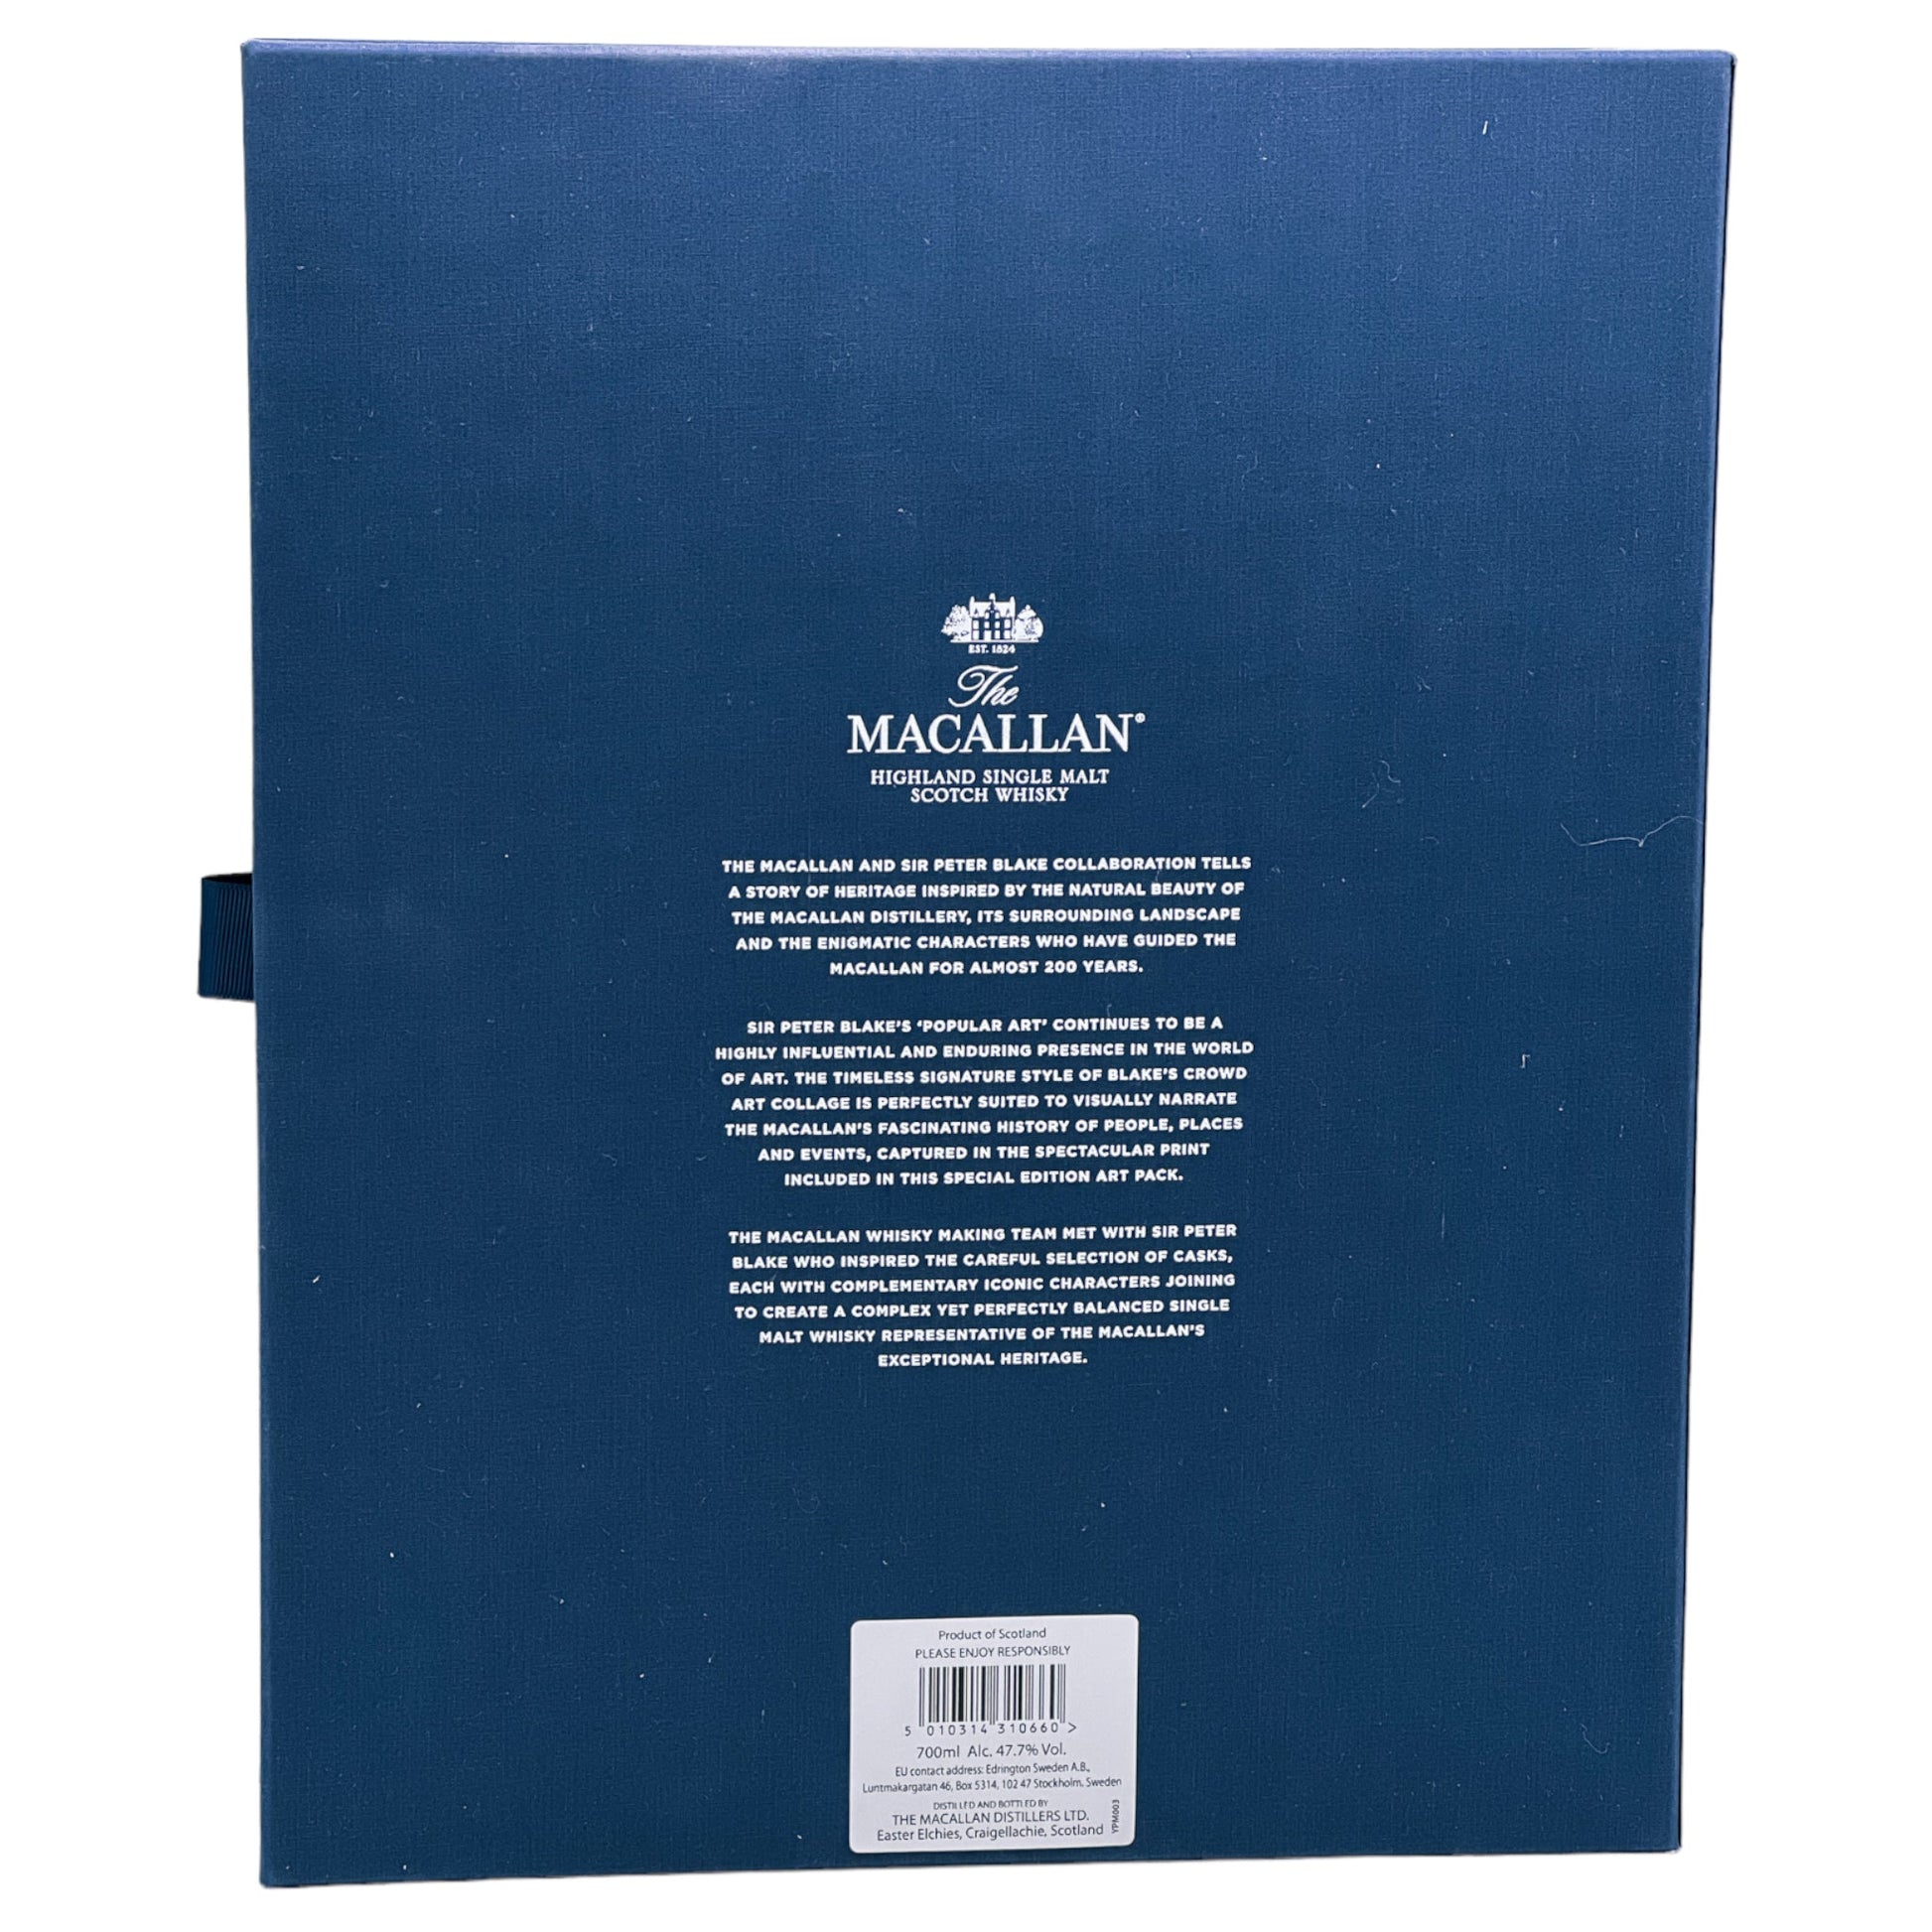 The Macallan | Peter Blake | Anecdotes of Ages | An Estate, a Community and a Distillery | 0,7l | 47,7%GET A BOTTLE